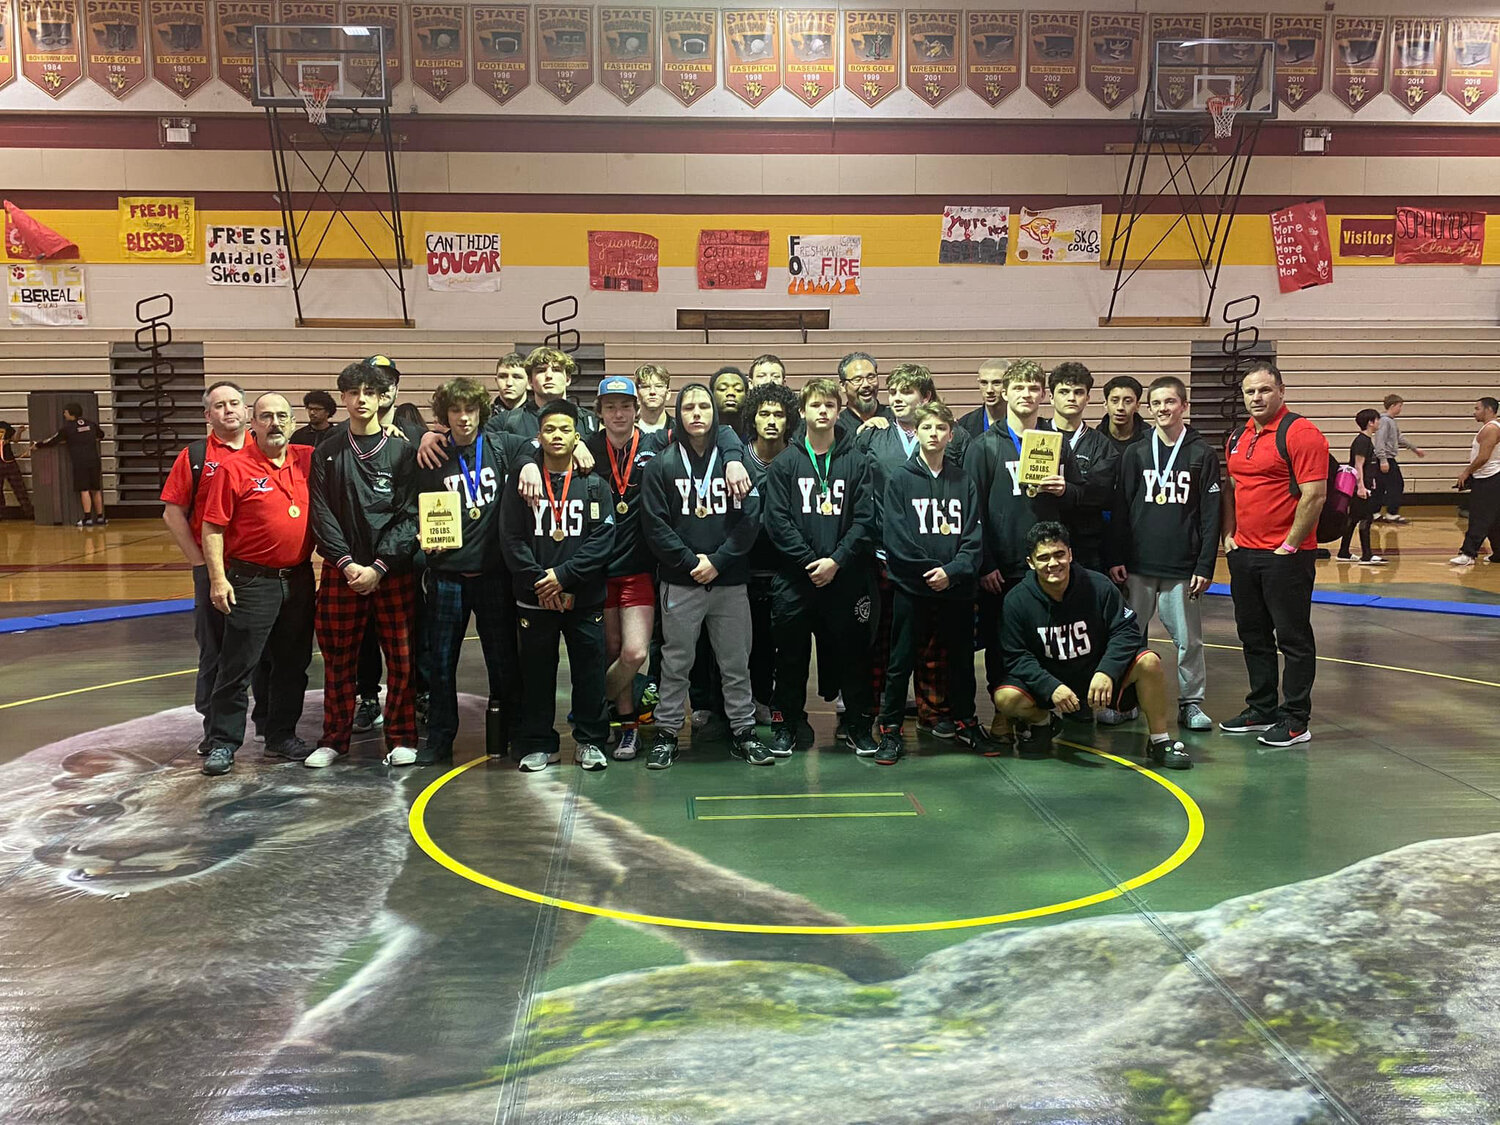 Yelm boys wrestling’s first place sub-regional team poses for a photo after they won the tournament on Feb. 3 at Capital High School.